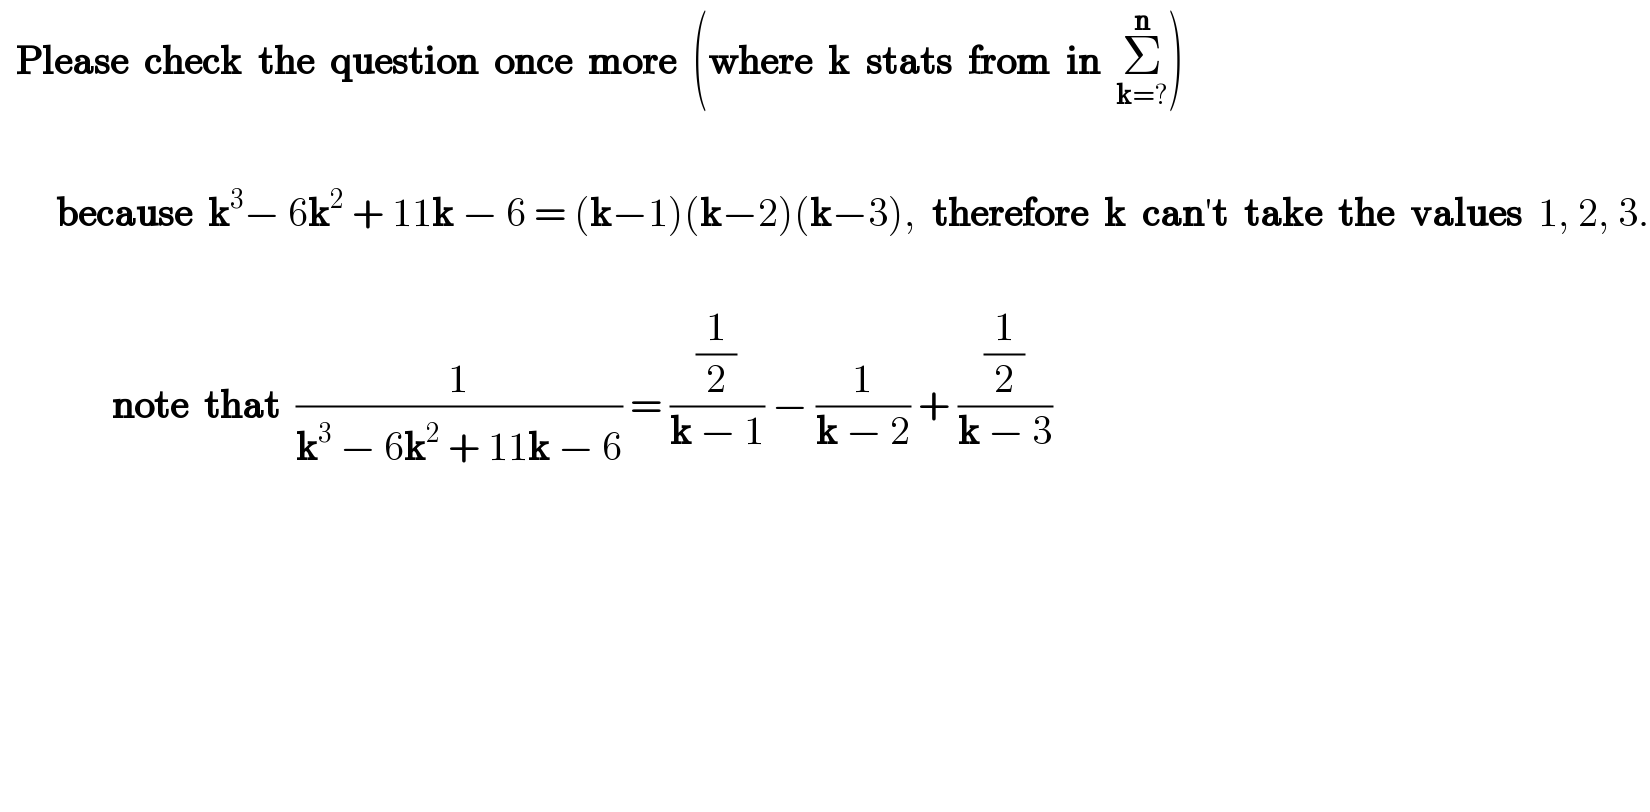   Please  check  the  question  once  more  (where  k  stats  from  in  Σ_(k=?) ^n )           because  k^3 − 6k^2  + 11k − 6 = (k−1)(k−2)(k−3),  therefore  k  can′t  take  the  values  1, 2, 3.                  note  that  (1/(k^3  − 6k^2  + 11k − 6)) = ((1/2)/(k − 1)) − (1/(k − 2)) + ((1/2)/(k − 3))              